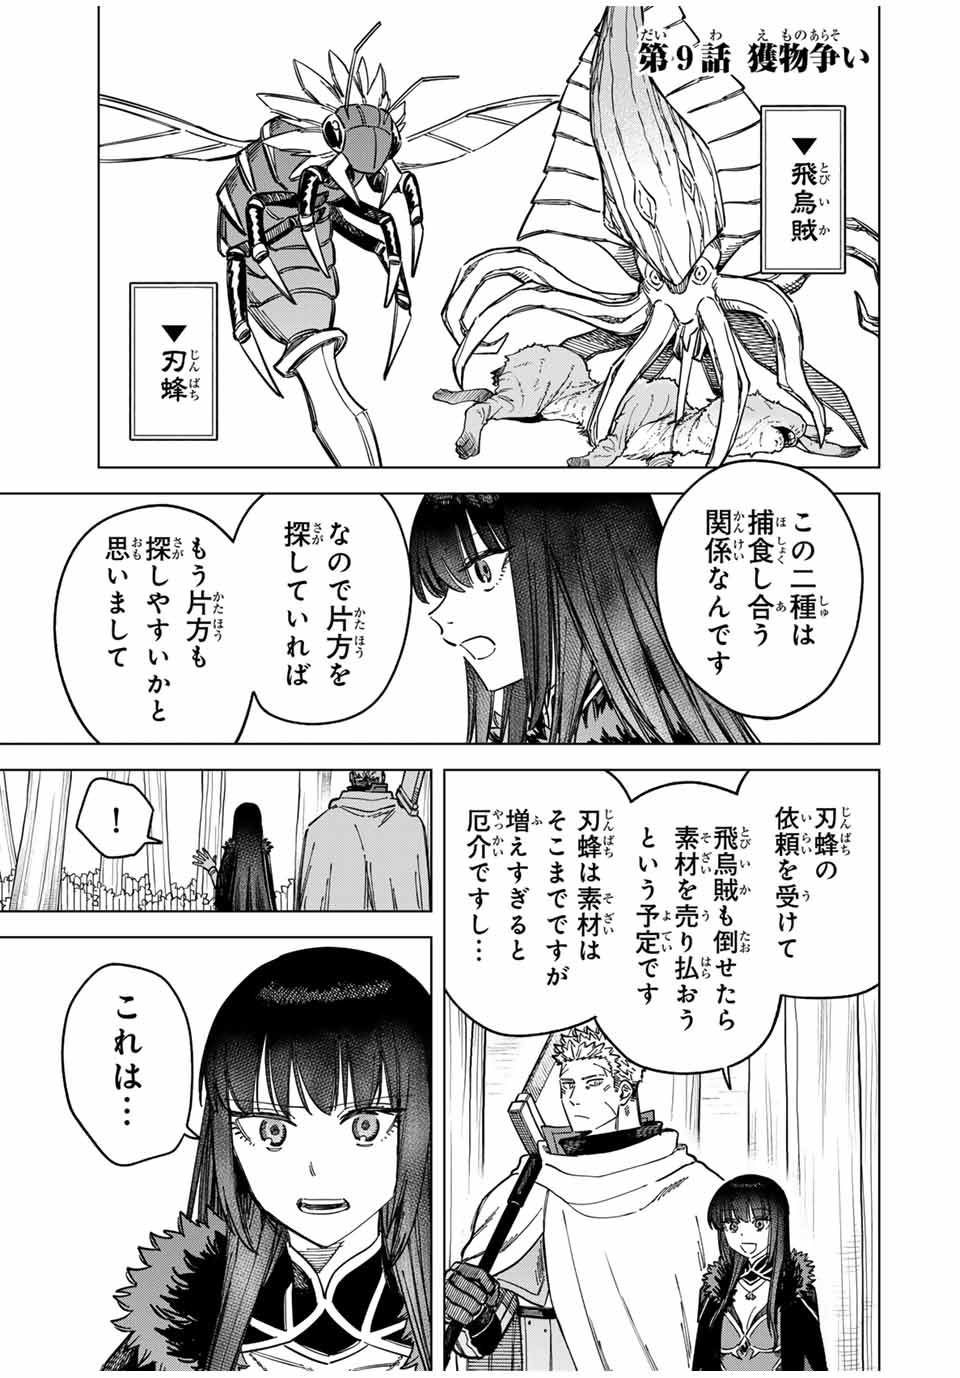 Witch and Mercenary 魔女と傭兵 第9.1話 - Page 1